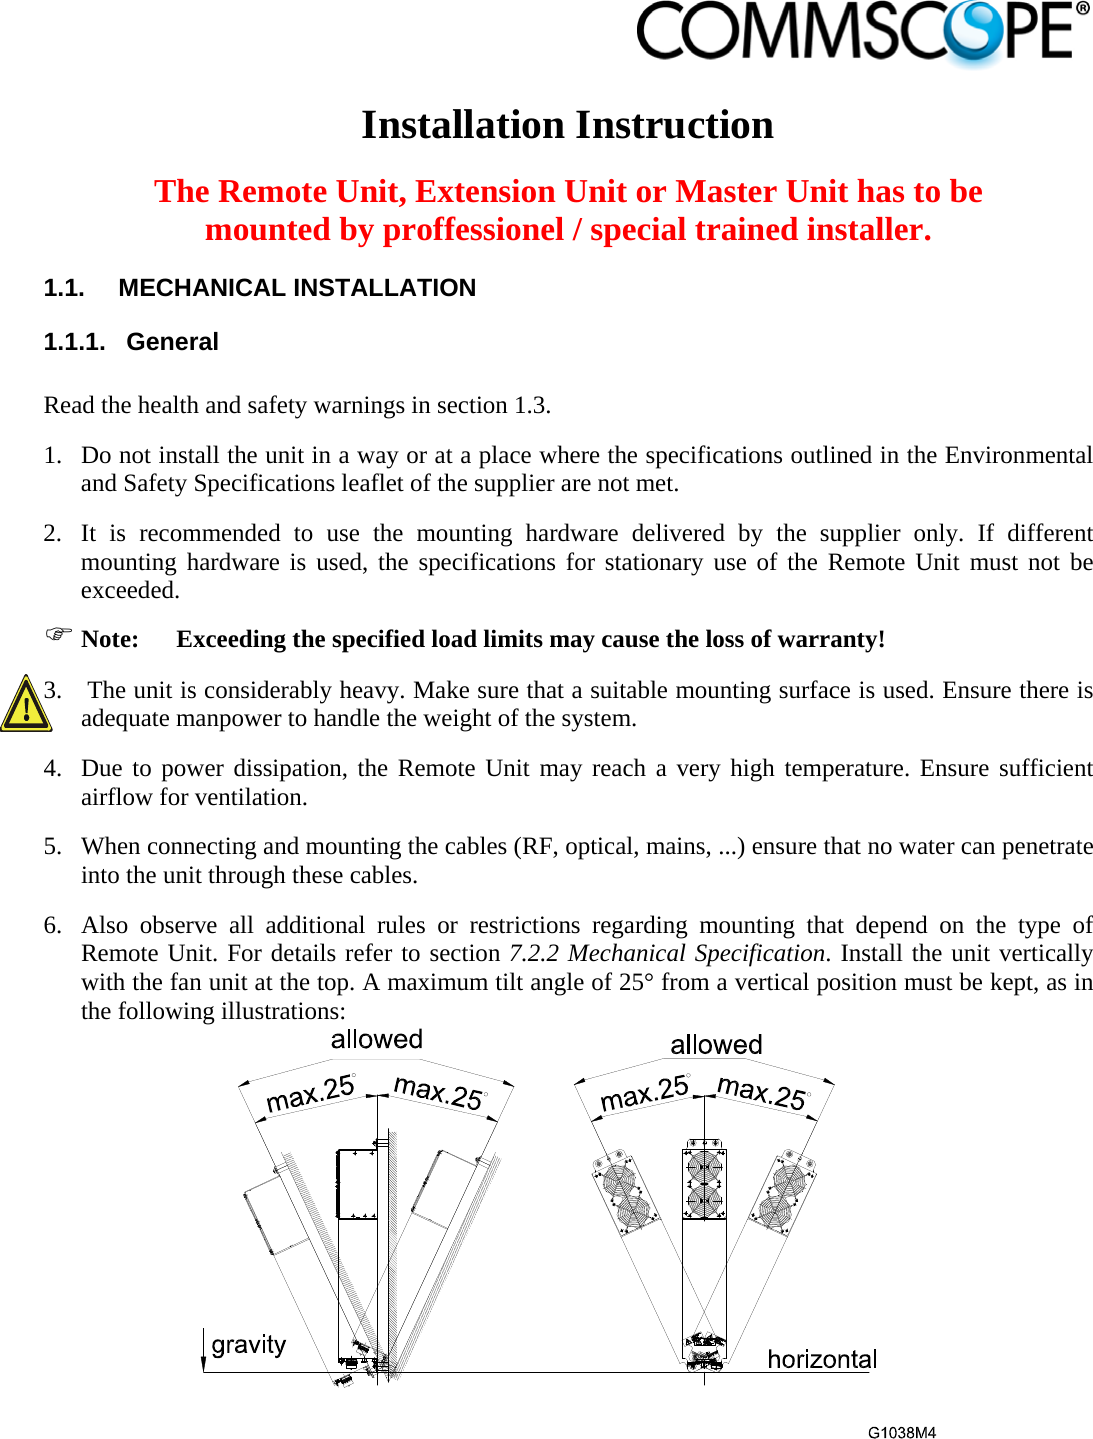                             Installation Instruction  The Remote Unit, Extension Unit or Master Unit has to be mounted by proffessionel / special trained installer. 1.1. MECHANICAL INSTALLATION 1.1.1. General  Read the health and safety warnings in section 1.3. 1. Do not install the unit in a way or at a place where the specifications outlined in the Environmental and Safety Specifications leaflet of the supplier are not met. 2. It is recommended to use the mounting hardware delivered by the supplier only. If different mounting hardware is used, the specifications for stationary use of the Remote Unit must not be exceeded.  Note:  Exceeding the specified load limits may cause the loss of warranty! 3.  The unit is considerably heavy. Make sure that a suitable mounting surface is used. Ensure there is adequate manpower to handle the weight of the system. 4. Due to power dissipation, the Remote Unit may reach a very high temperature. Ensure sufficient airflow for ventilation. 5. When connecting and mounting the cables (RF, optical, mains, ...) ensure that no water can penetrate into the unit through these cables. 6. Also observe all additional rules or restrictions regarding mounting that depend on the type of Remote Unit. For details refer to section 7.2.2 Mechanical Specification. Install the unit vertically with the fan unit at the top. A maximum tilt angle of 25° from a vertical position must be kept, as in the following illustrations:  